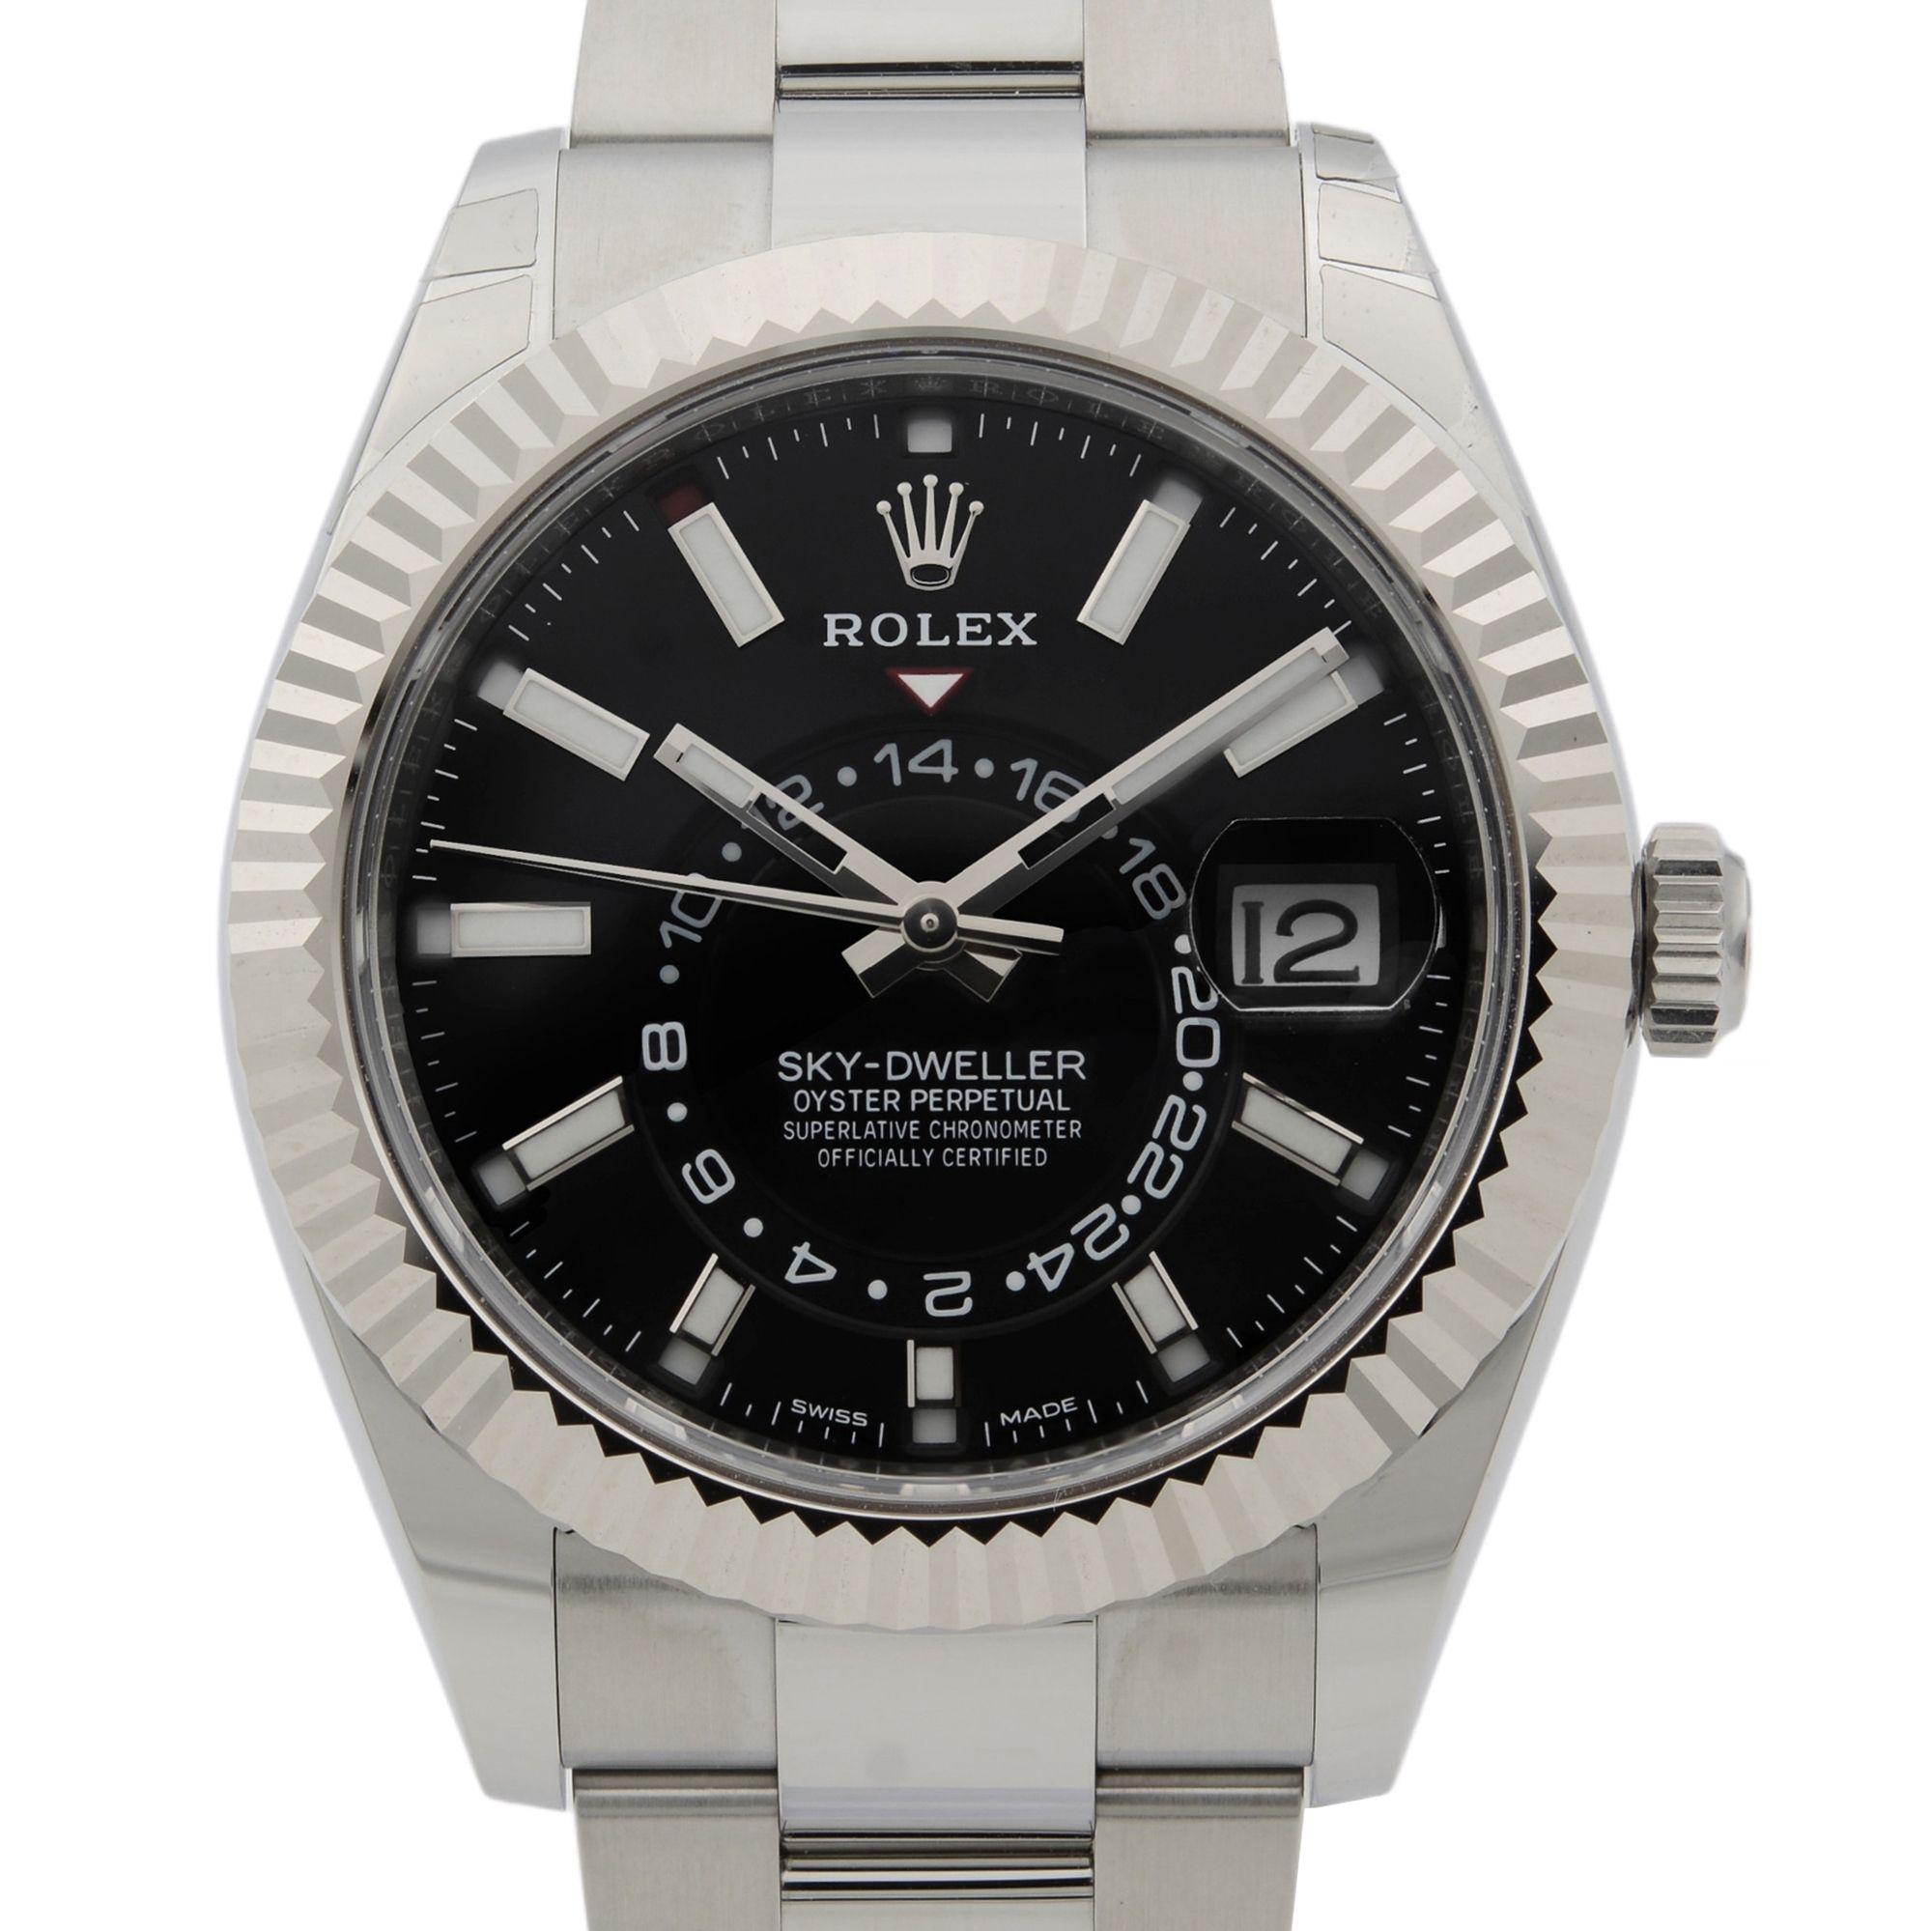 This brand new Rolex Sky-Dweller 326934 is a beautiful men's timepiece that is powered by mechanical (automatic) movement which is cased in a stainless steel case. It has a round shape face, gmt, date indicator dial and has hand sticks style